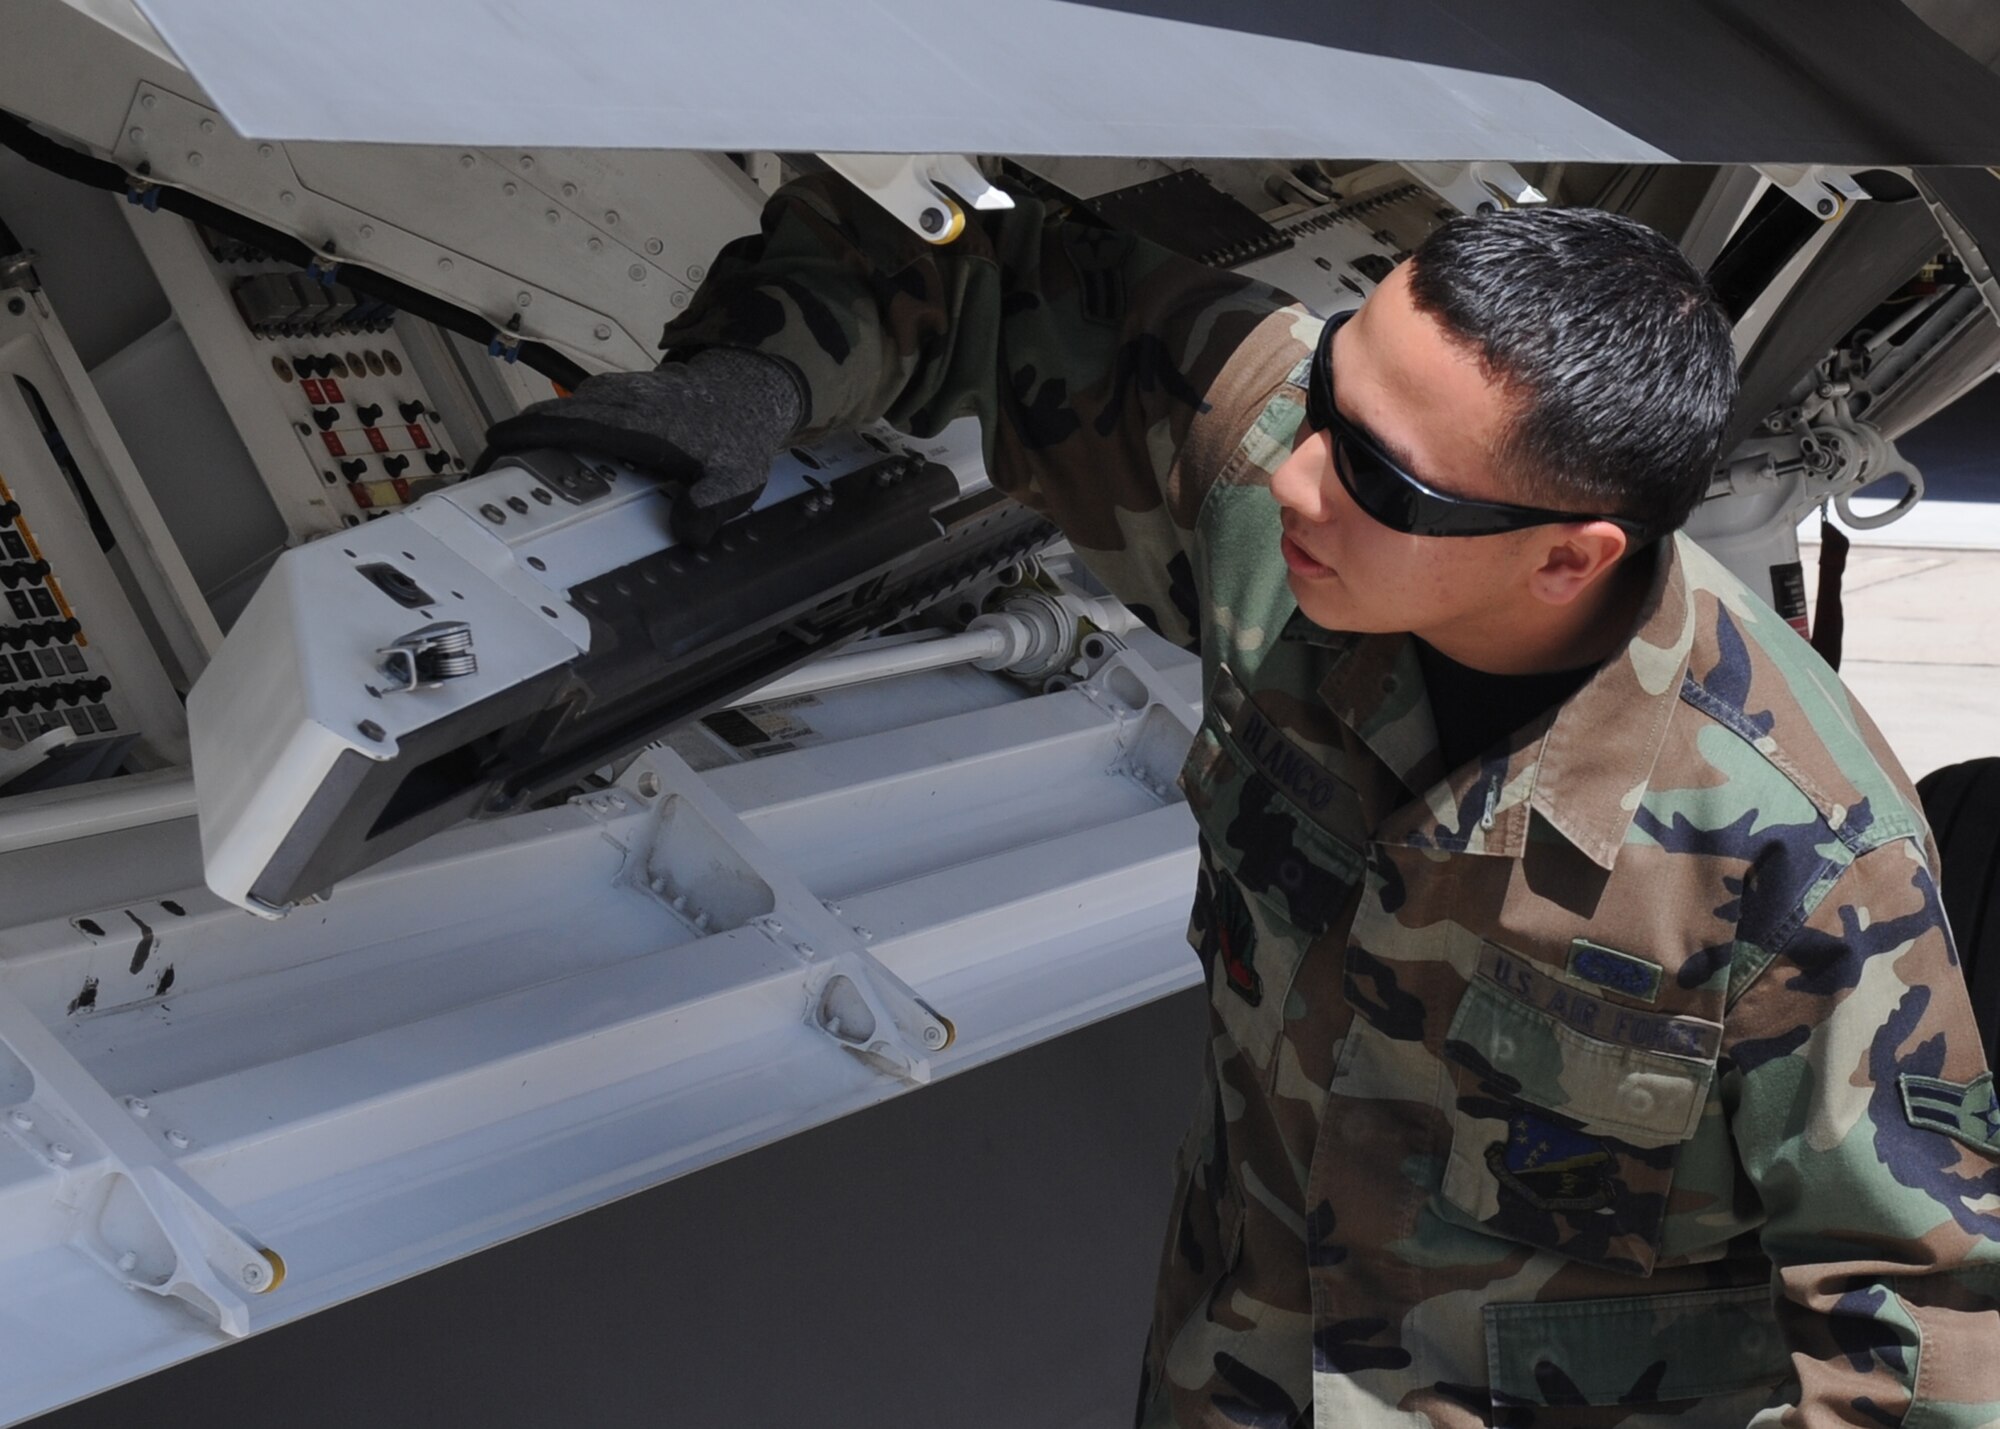 Airman 1st Class Carlos Blanco, 49th Aircraft Maintenance Squadron, checks the status of an F-22A Raptor before loading the missle during the Quarterly Load Crew competition, April 10, at Holloman Air Force Base, N.M.  (U.S. Air Force photo/Senior Airman Michael Means)